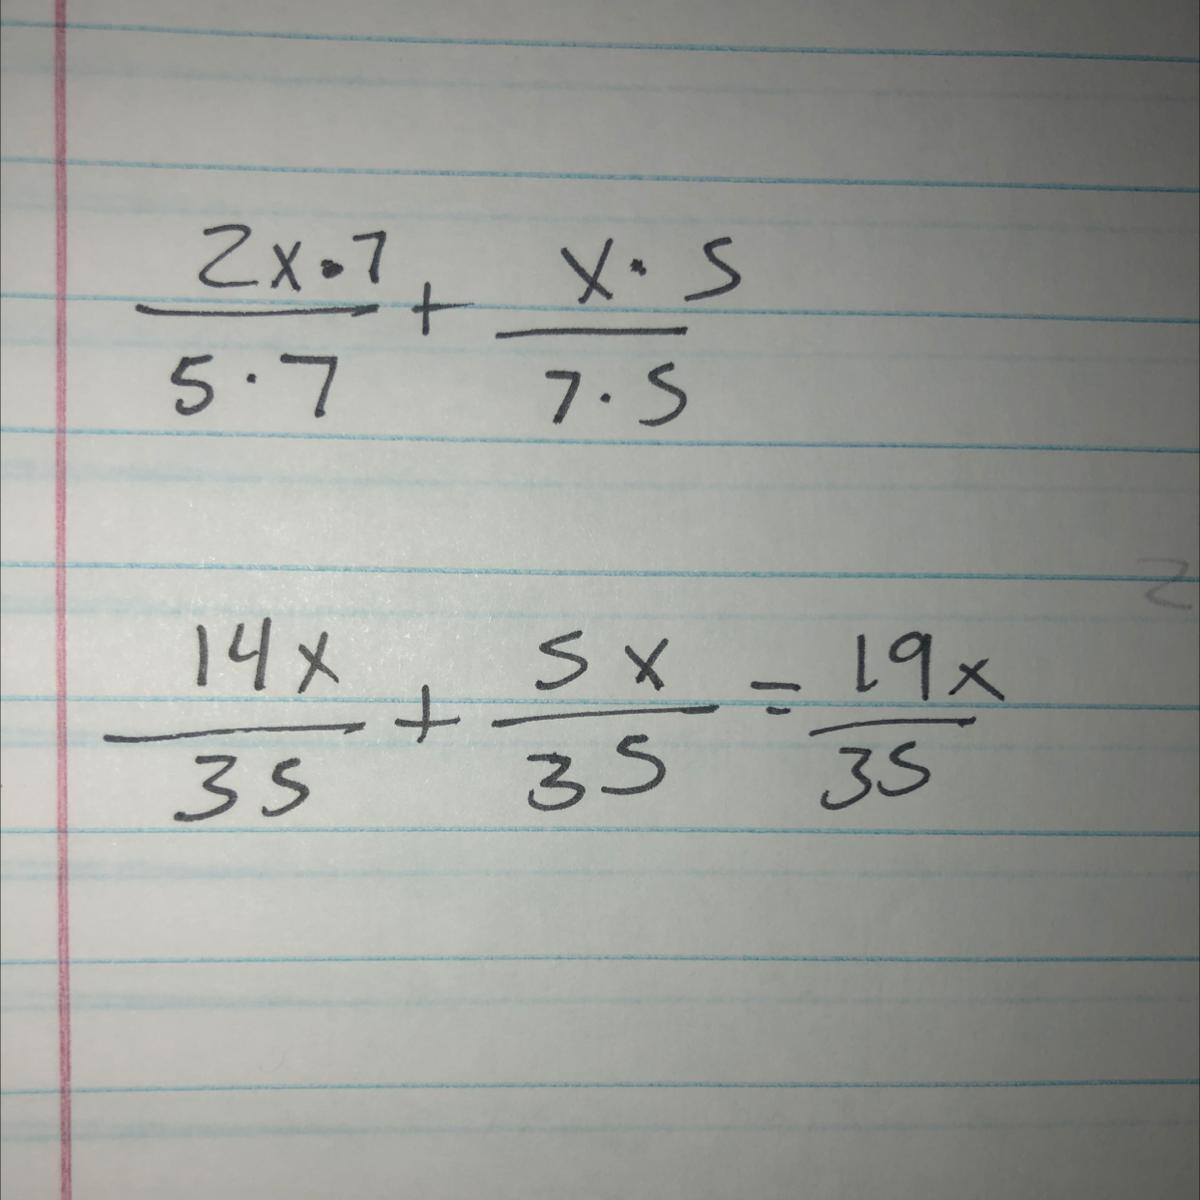 Gemma Says That,2x/5 + X/7 = 3x/12Why Is Gemma Wrong?Work Out The Correct Answer.